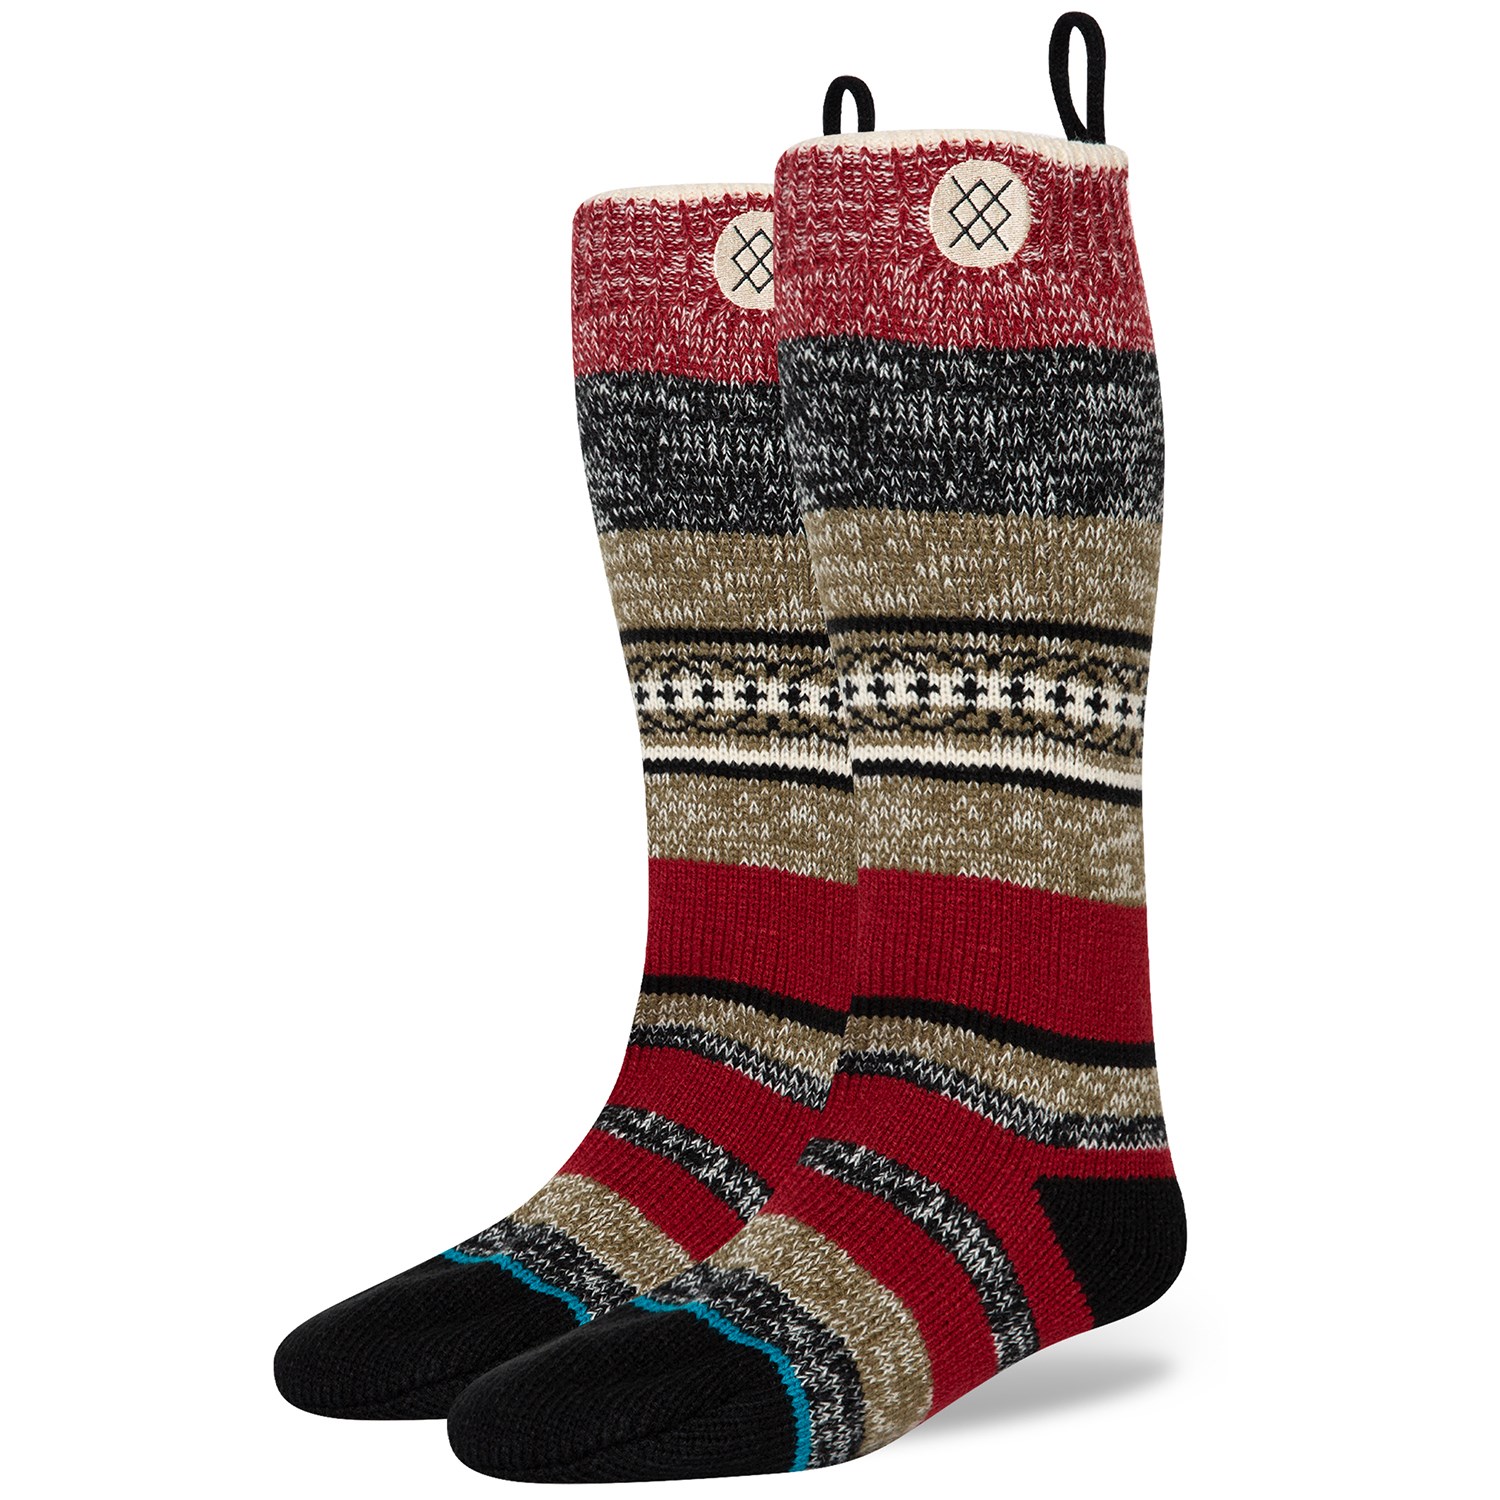 Носки Stance Merry Merry Stocking, цвет Red merry see fancy body stocking